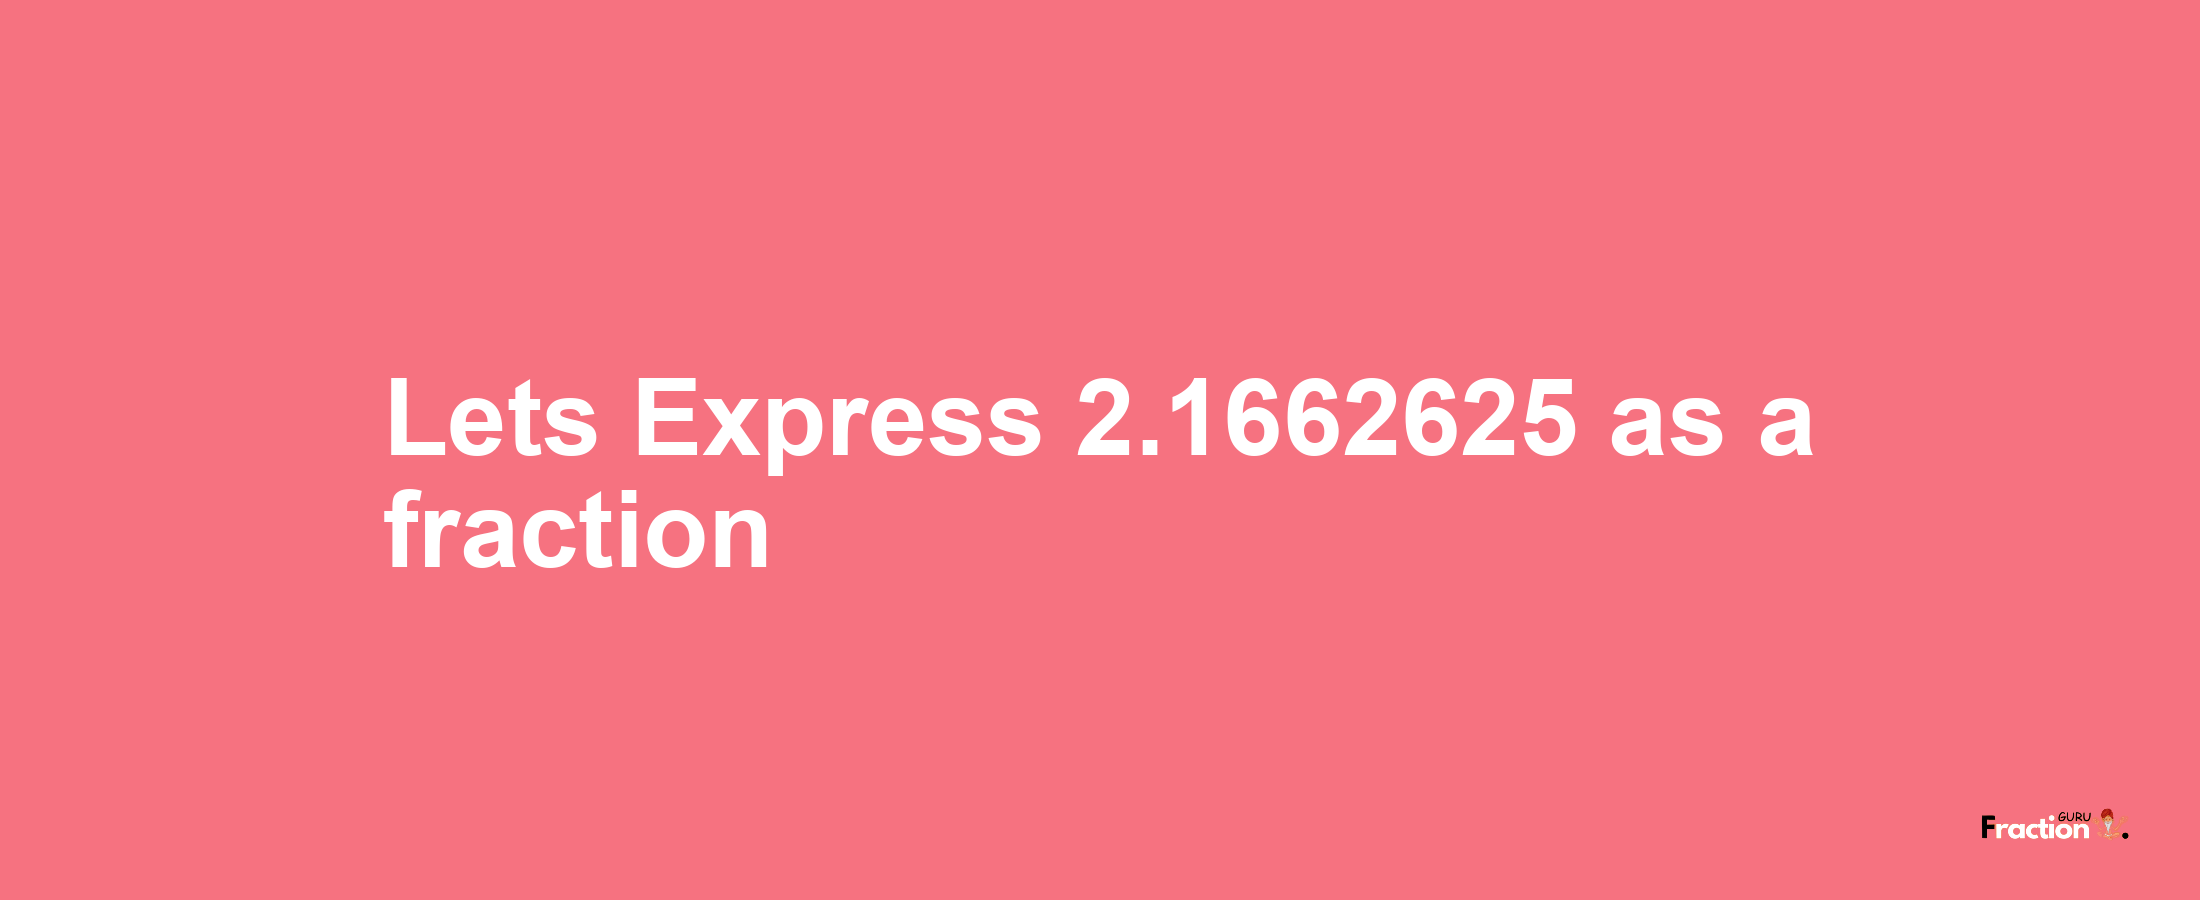 Lets Express 2.1662625 as afraction